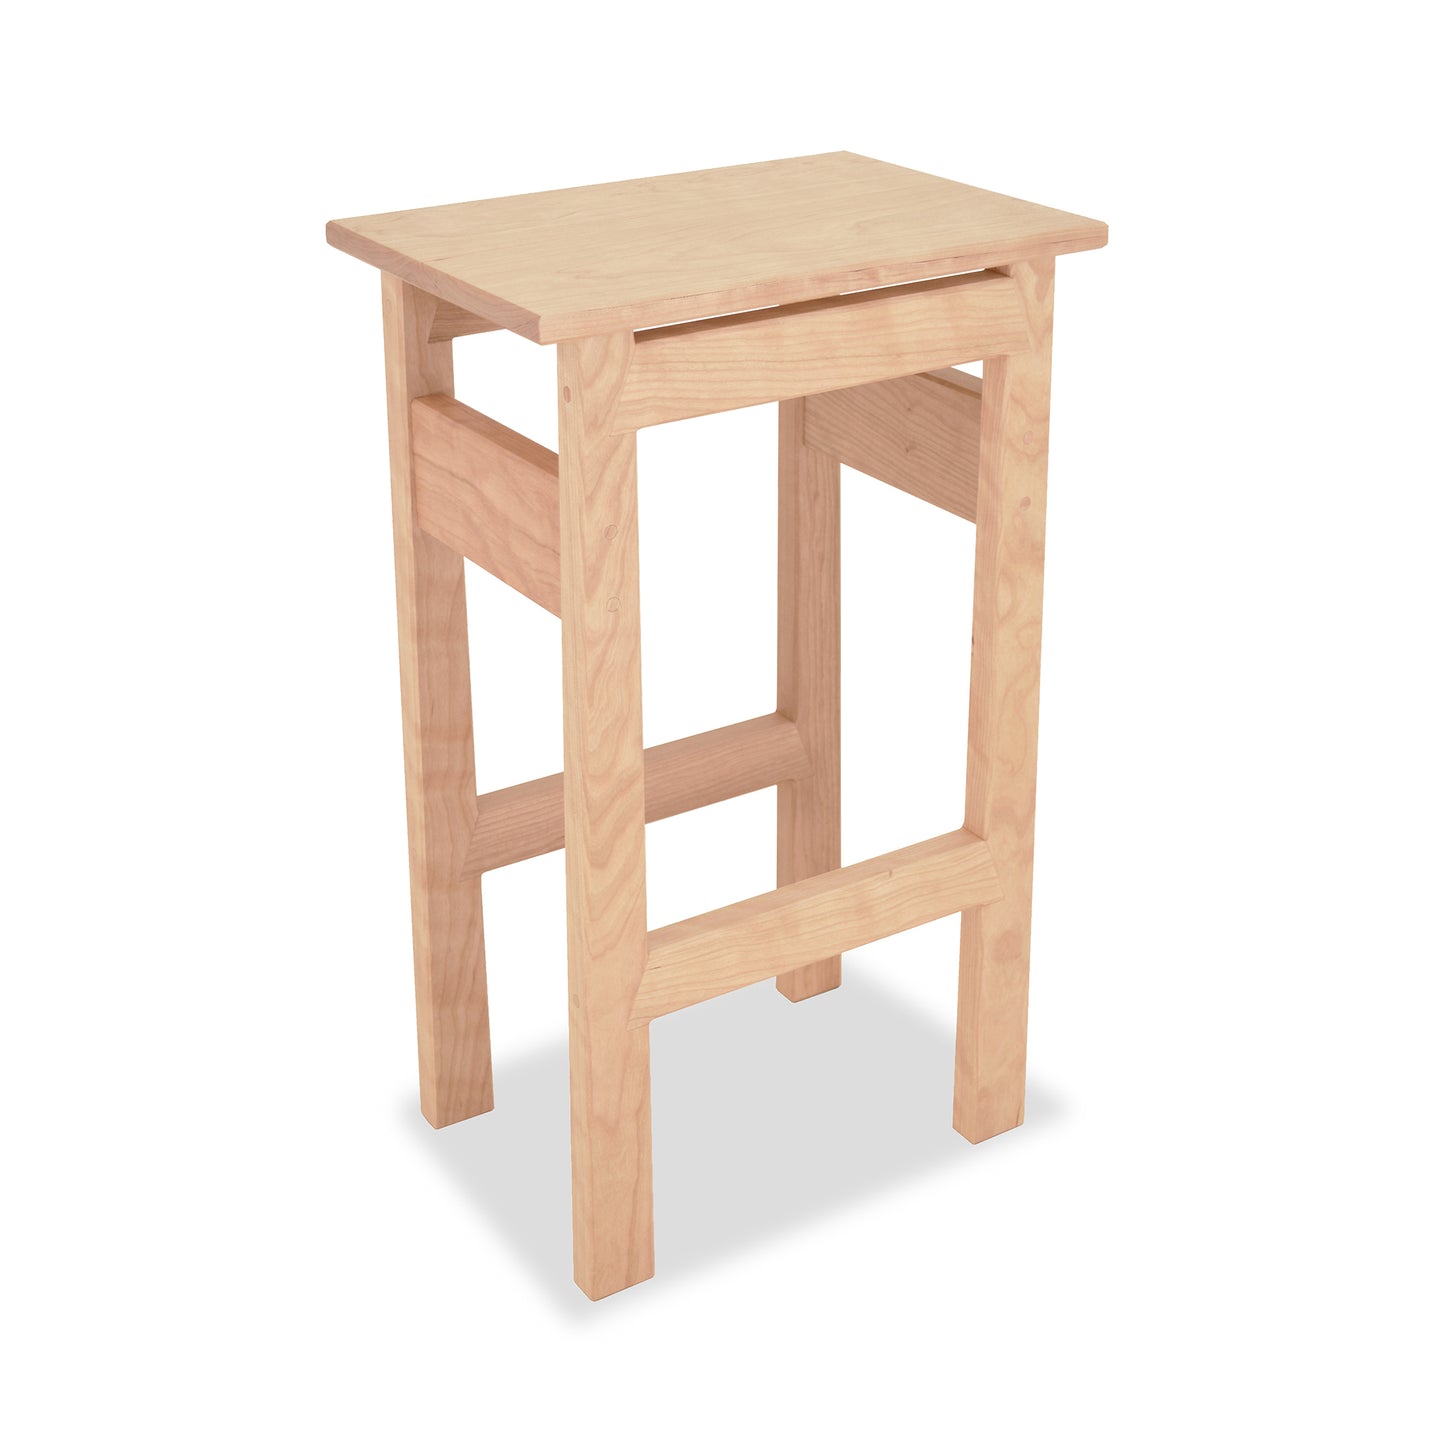 A Maple Corner Woodworks' Contemporary Asian Stool on a white background, showcasing its natural wood beauty.